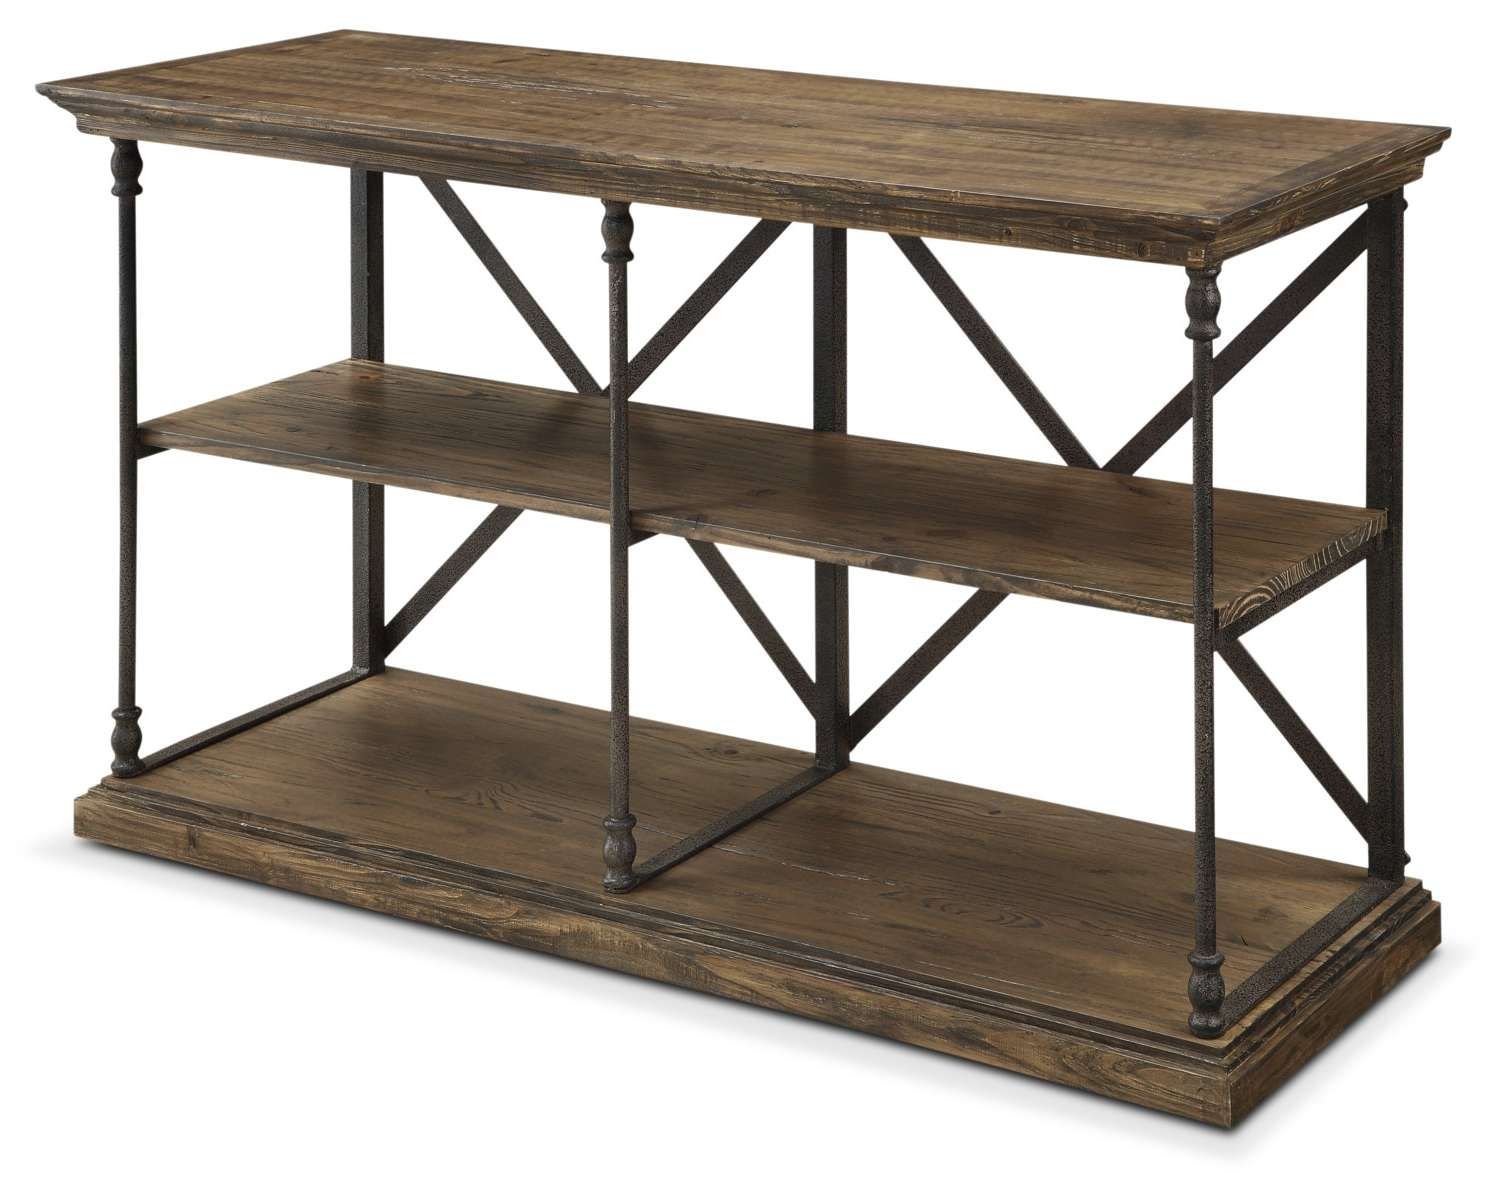 Bedford Tv Stand – Pine | Value City Furniture And Mattresses With Regard To Bedford Tv Stands (View 1 of 15)